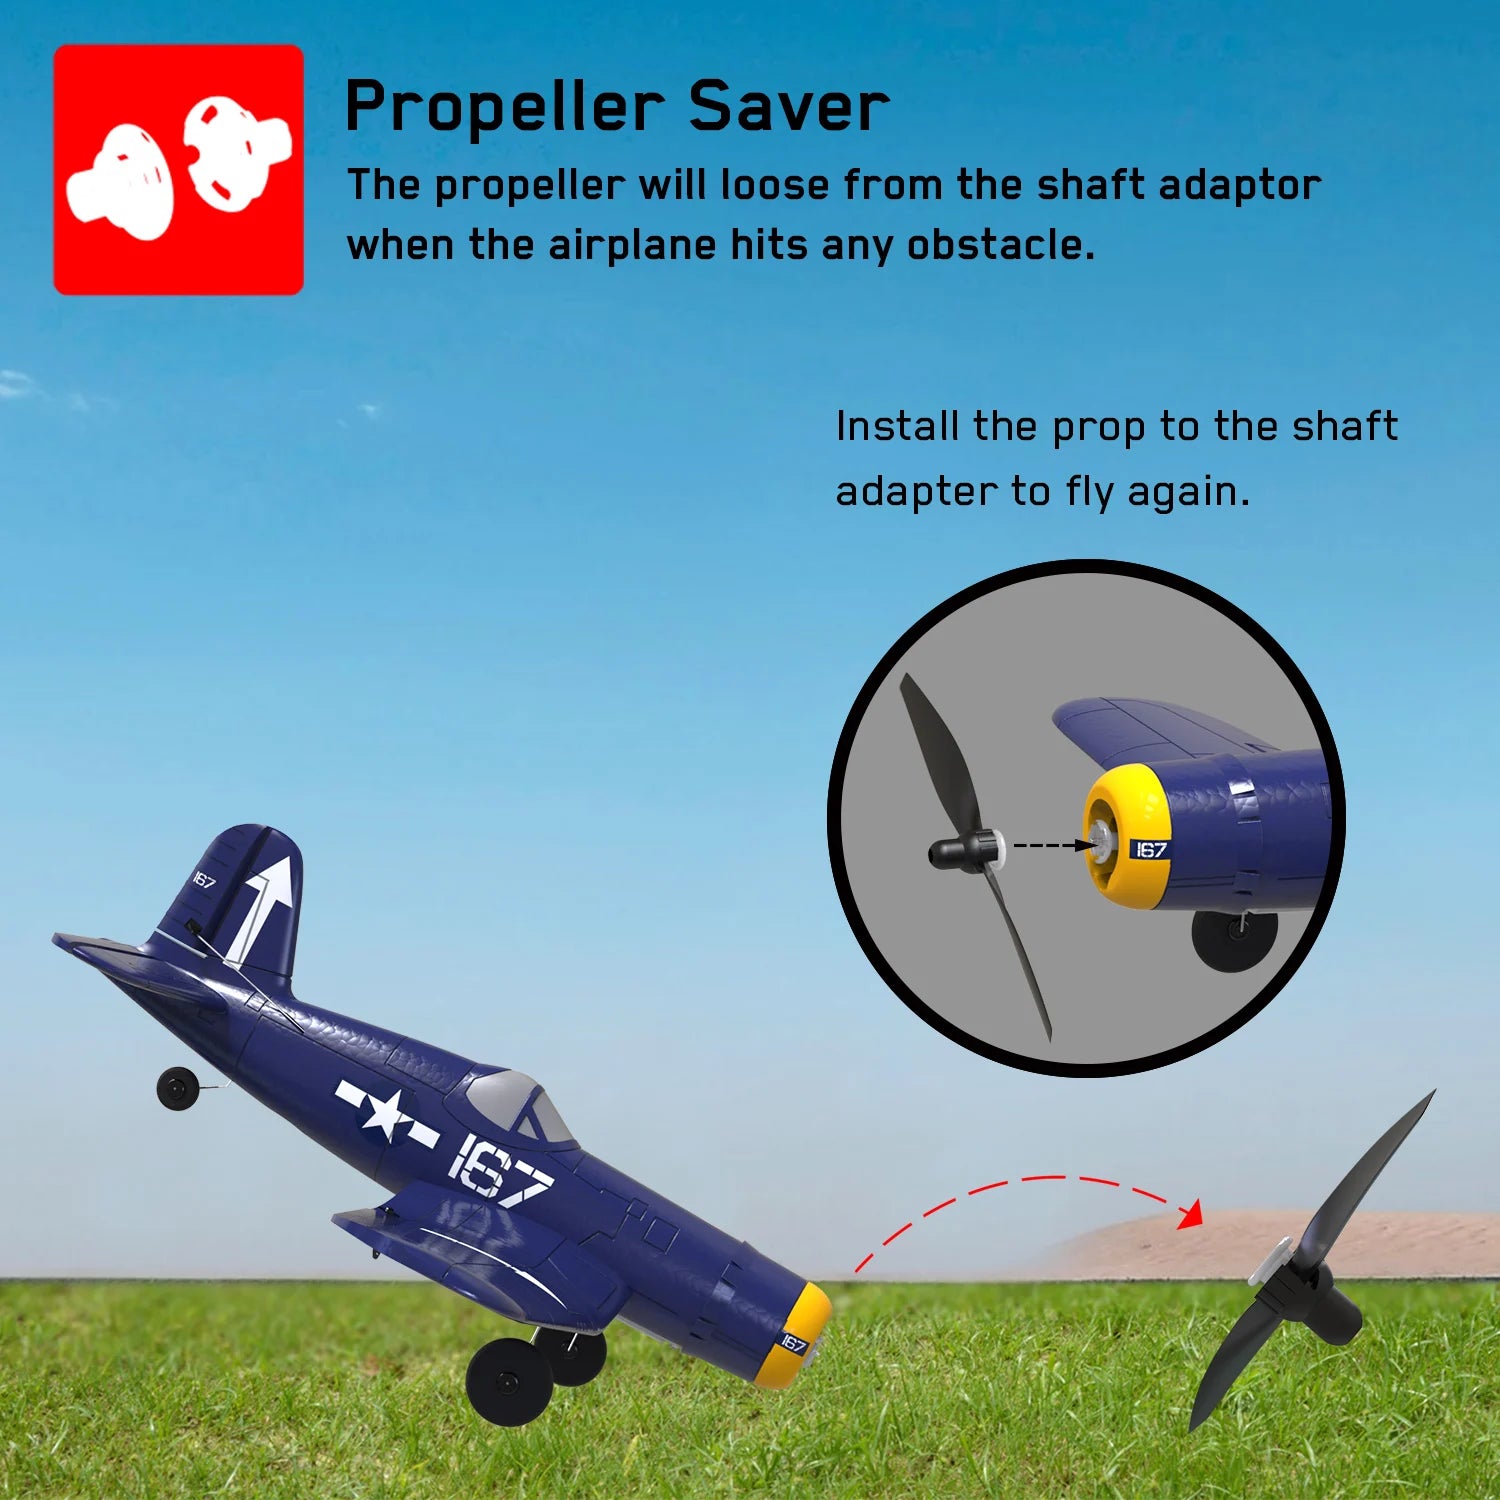 EPP 400mm RC Plane, Propeller Saver The propeller will loose from the shaft adapter when the airplane hits any